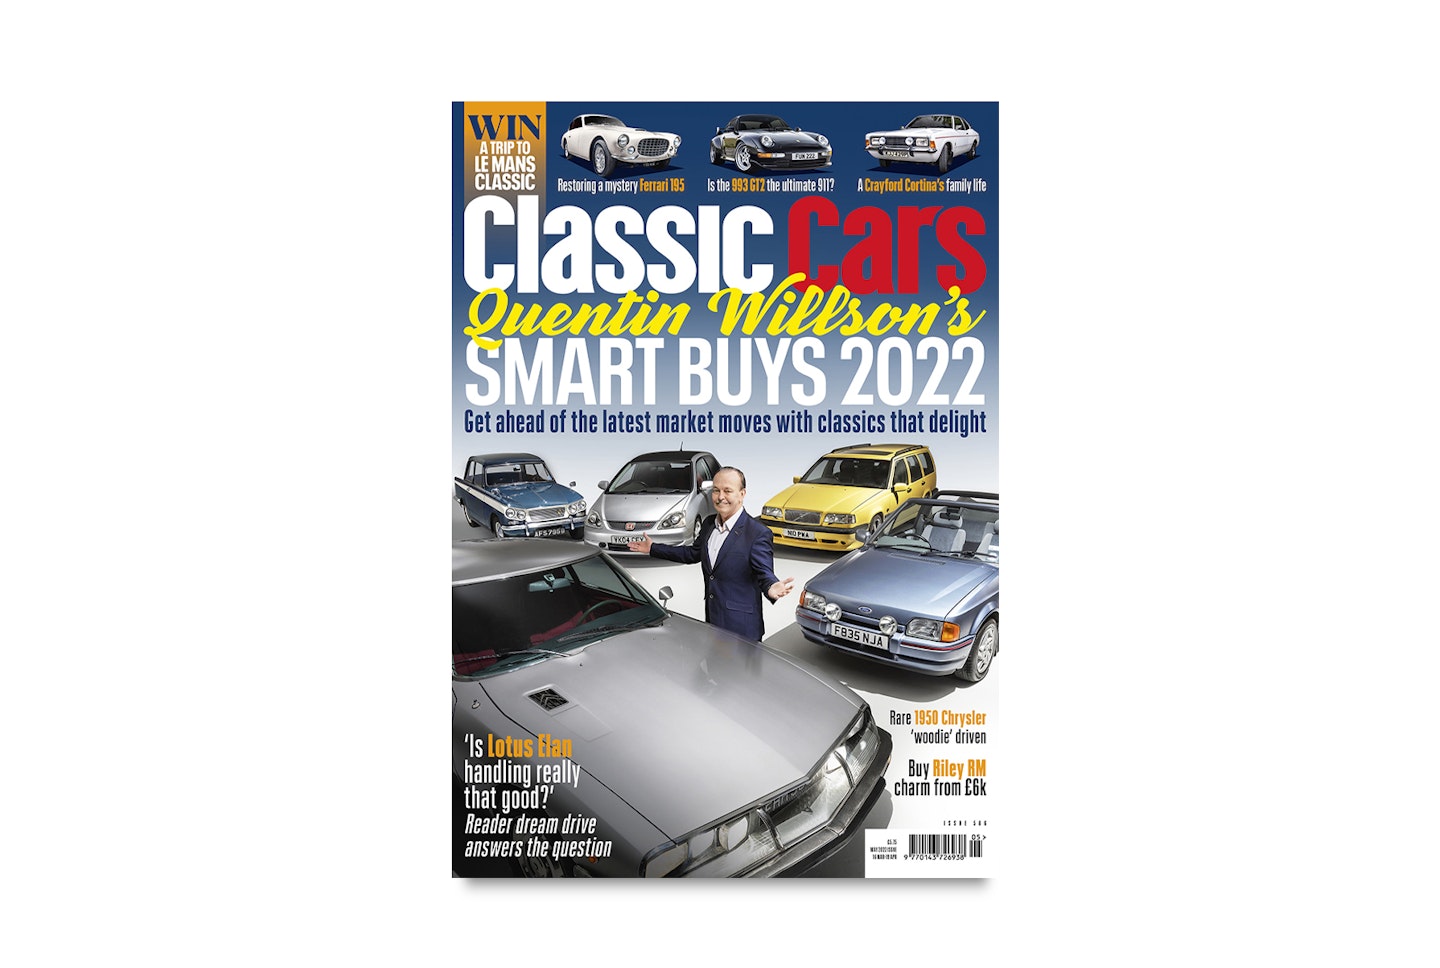 Classic Cars May 2022 issue